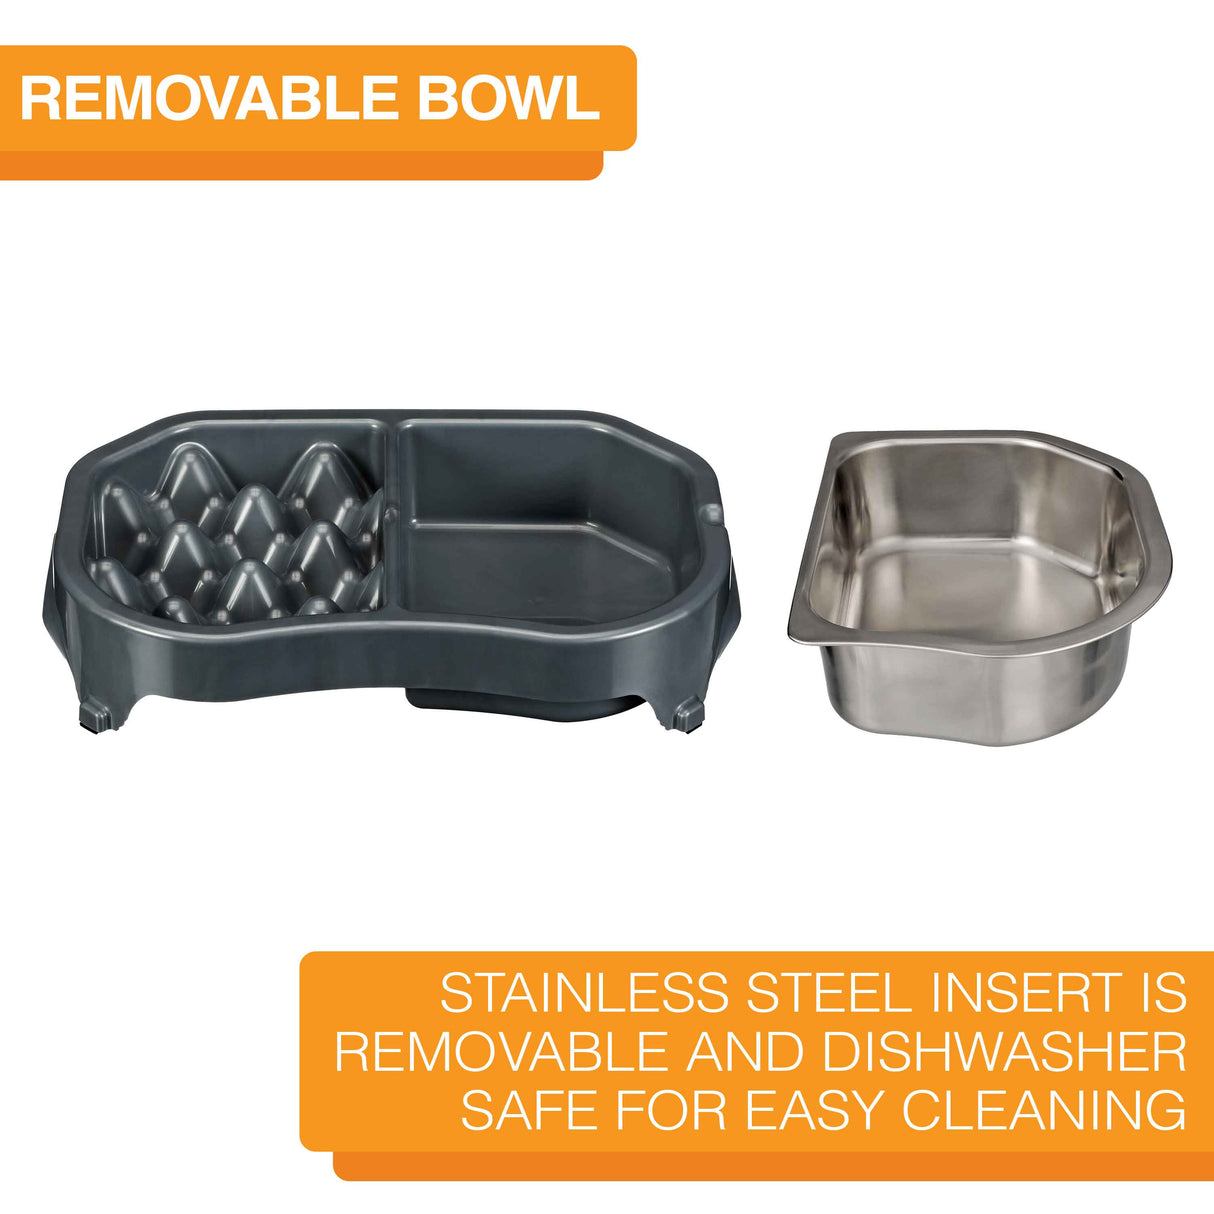 The Double Diner stainless steel insert is removeable and dishwasher safe